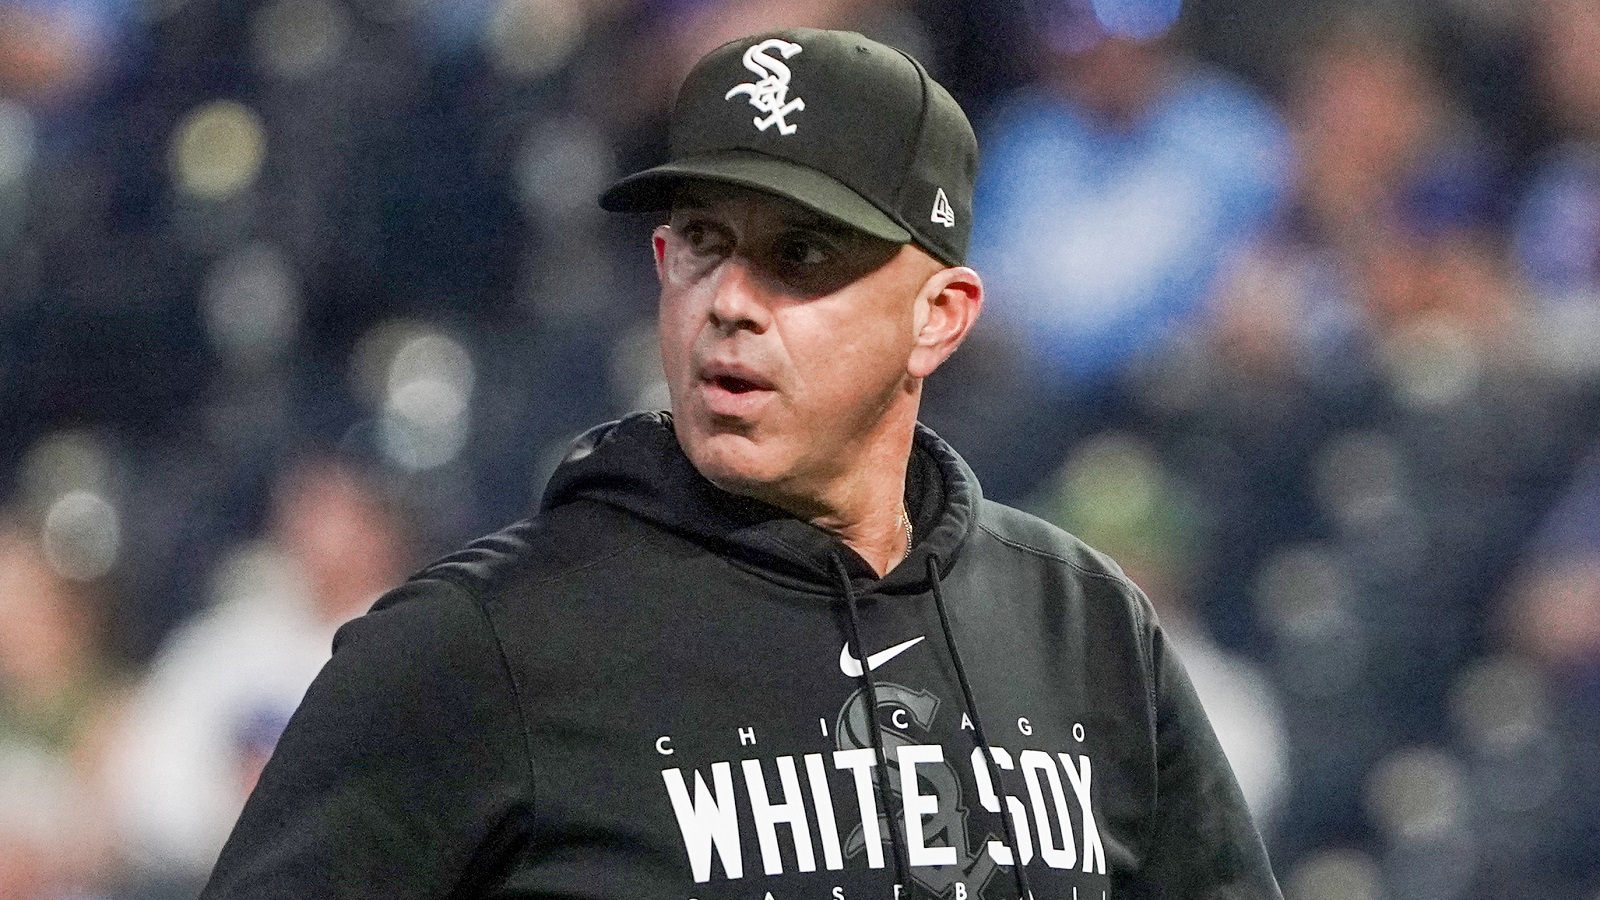 Pedro Grifol officially named the White Sox new manager